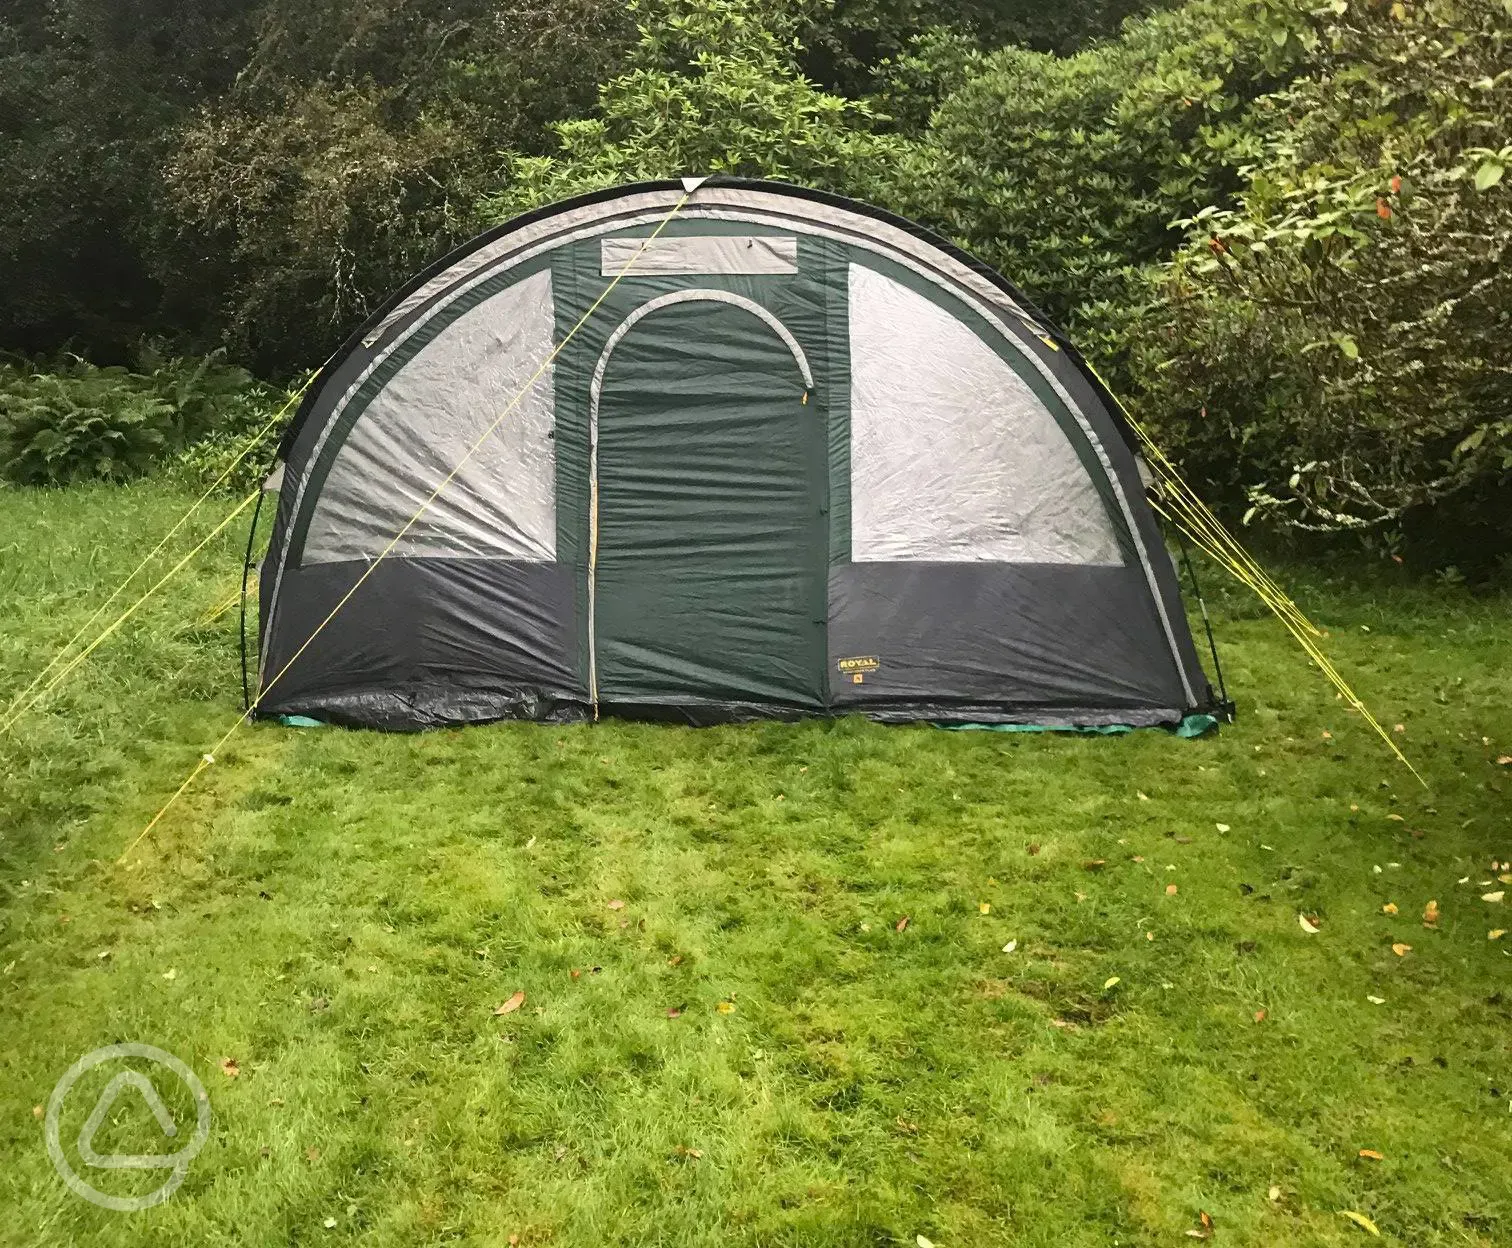 Wild camping pitches